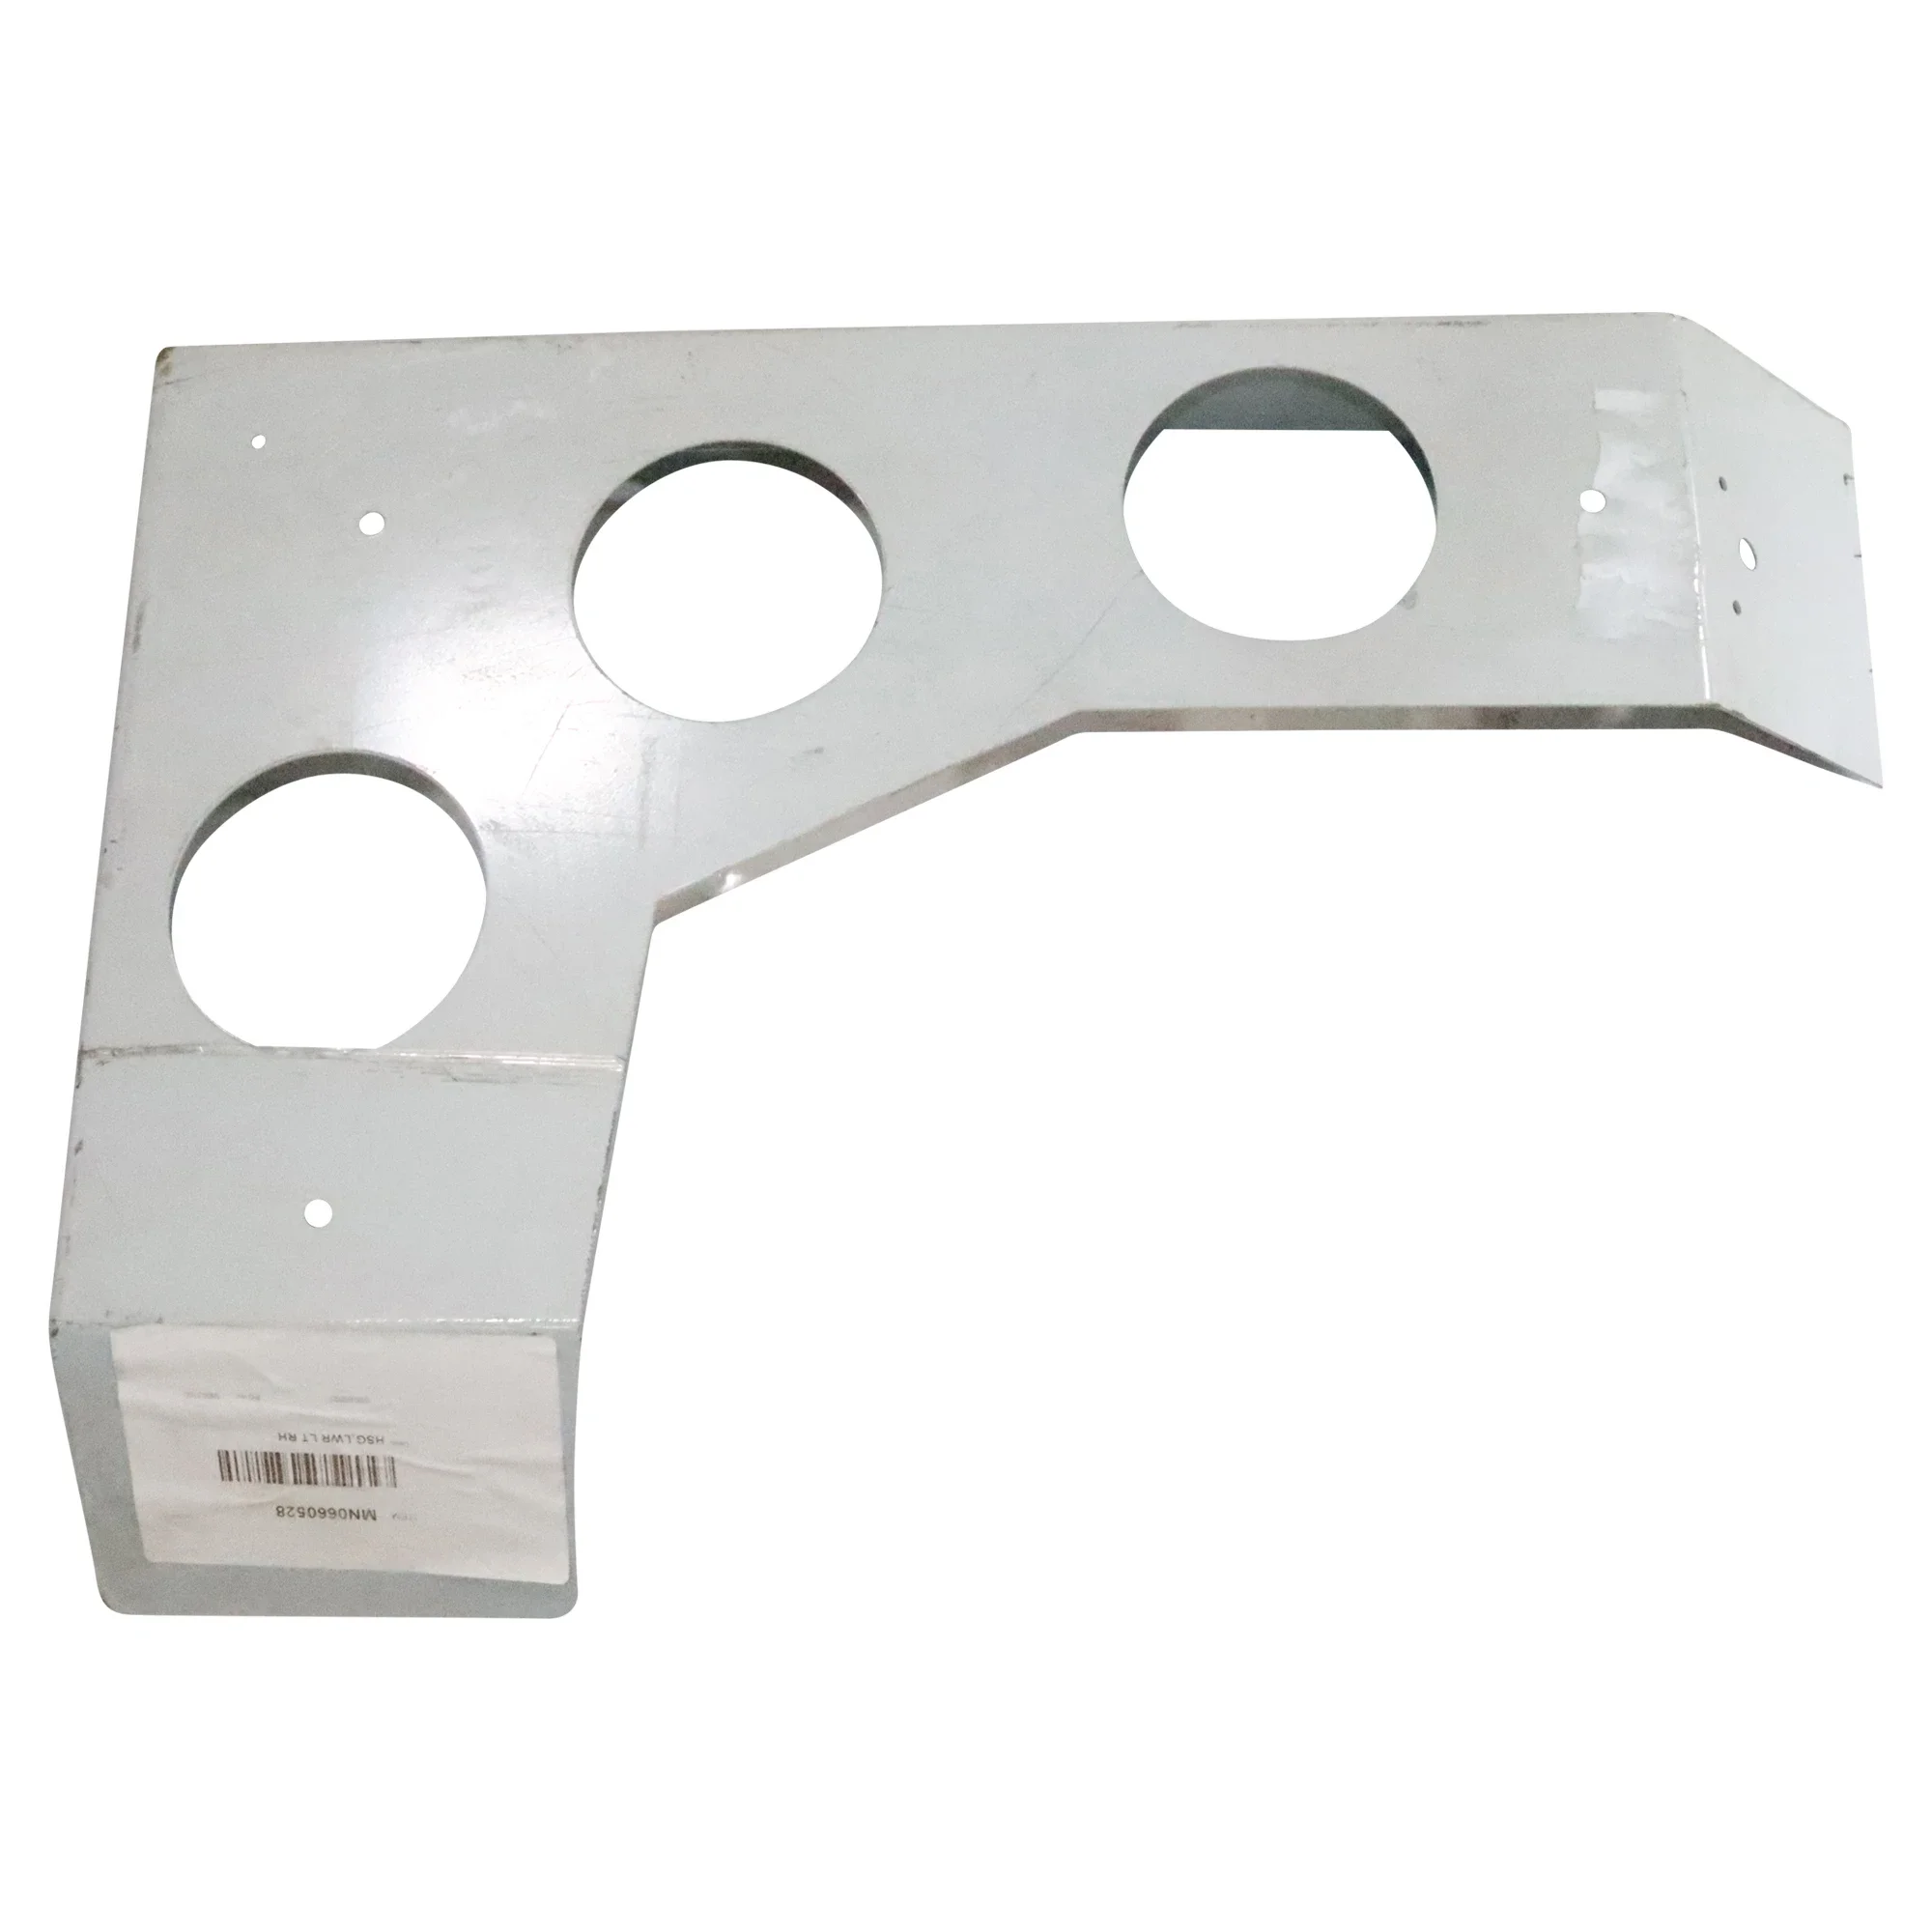 Wastebuilt® Replacement for McNeilus Lower Light Right Hand Housing